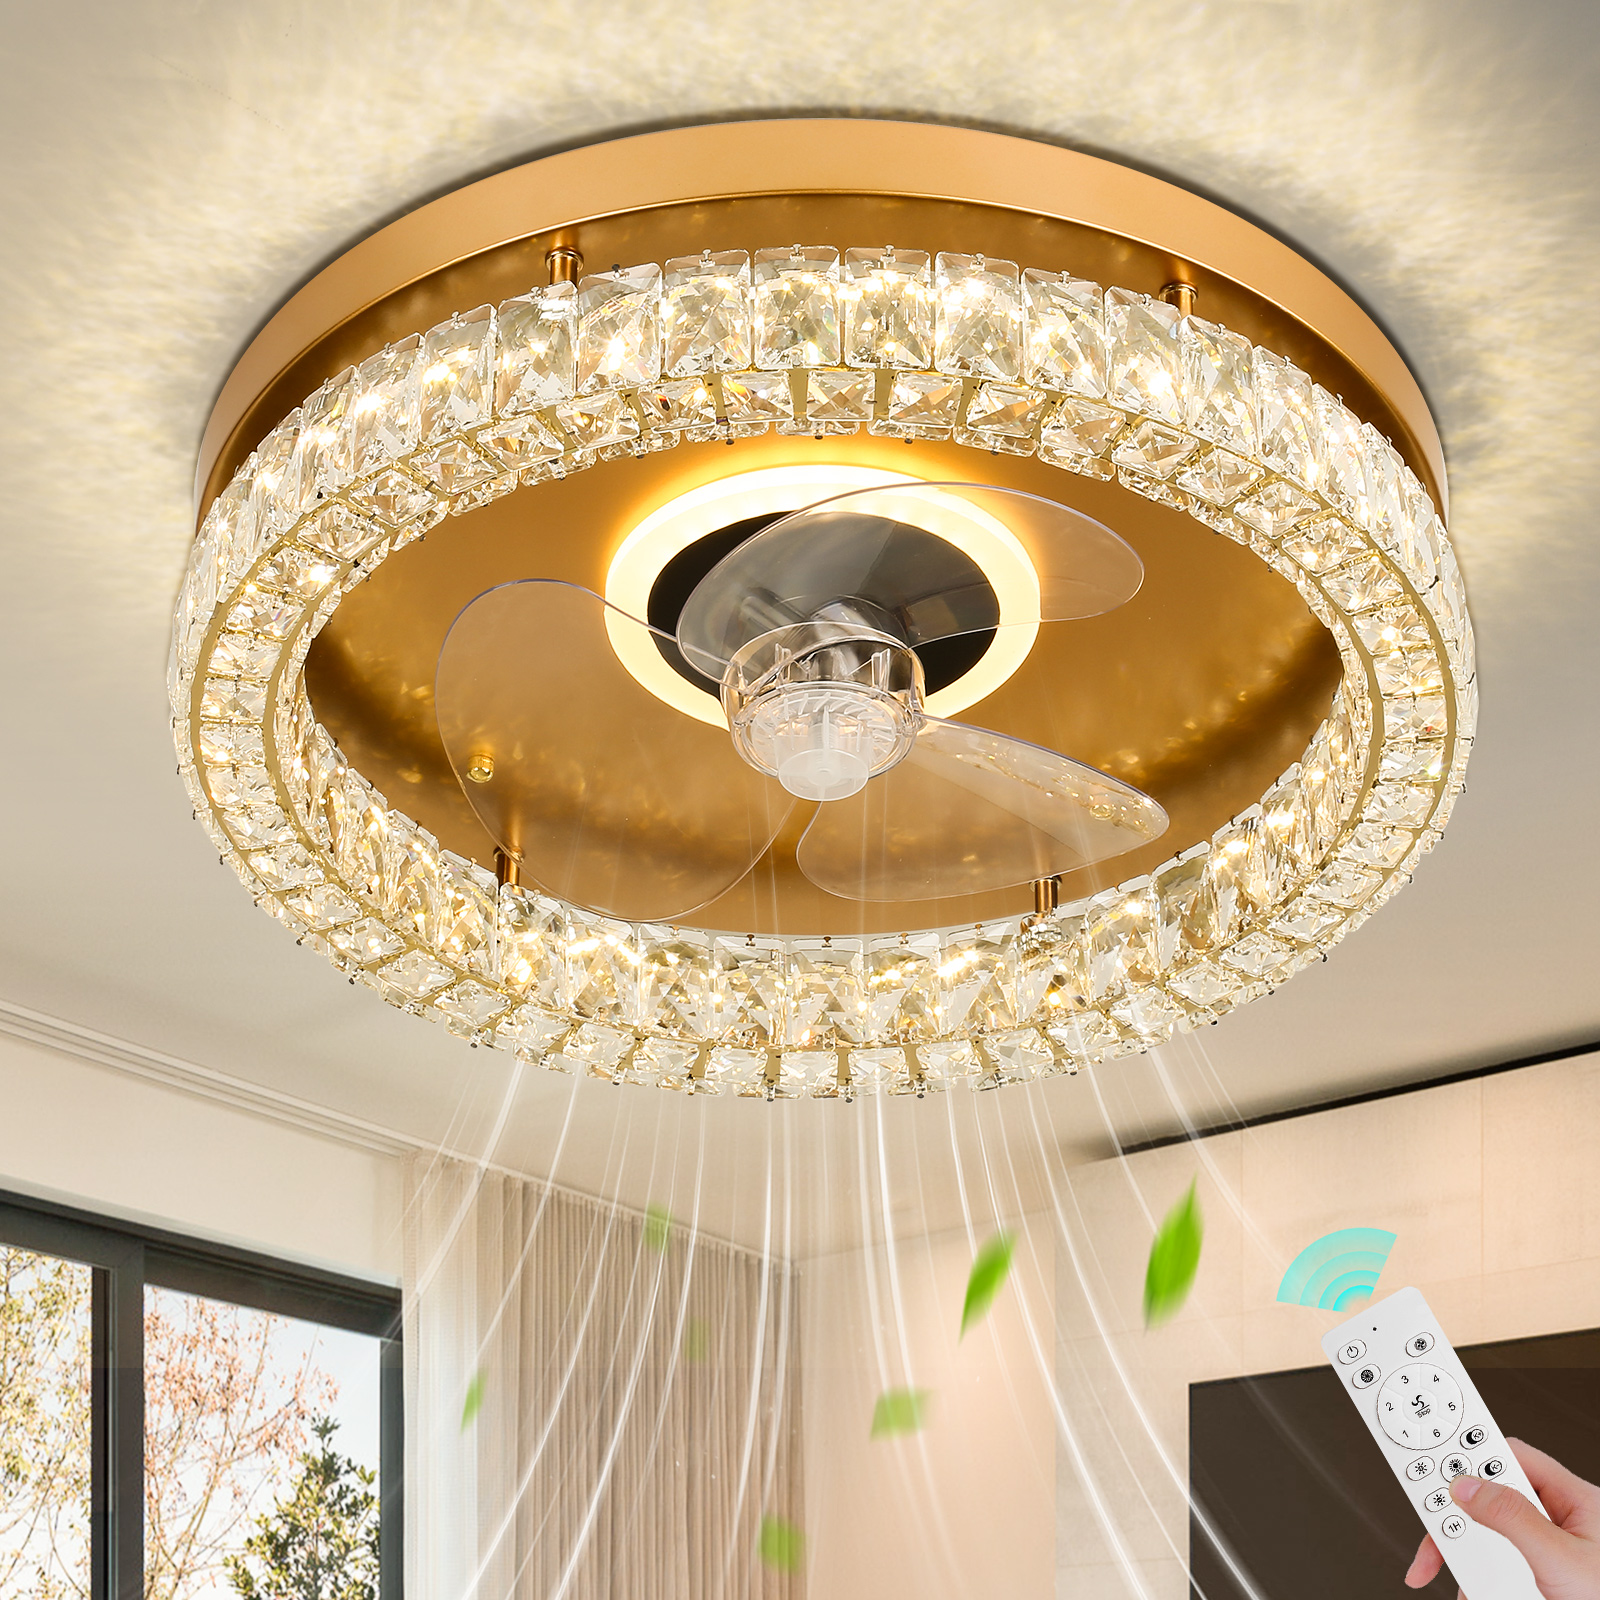 Finktonglan Modern Crystal Led Ceiling Fan Lighting Gold Fandeliers with Light and Remote 6-Speed Chandelier Fixtures 18.9" Home Appliance Indoor Interior Room Decoration